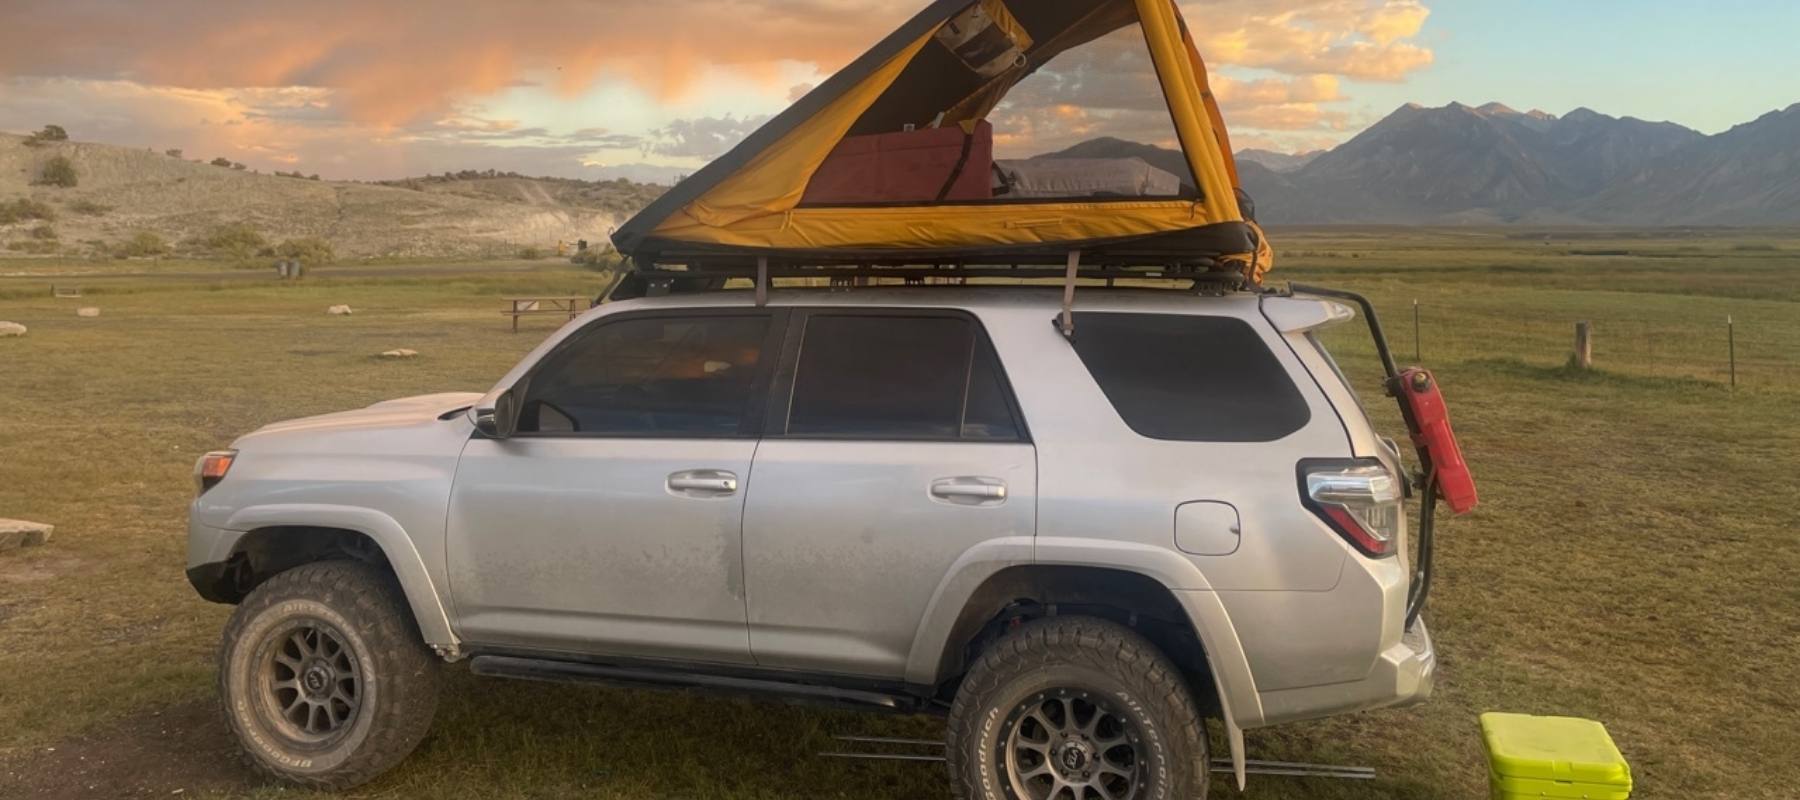 toyota 4runner trail edition roof top tent camping car camping camper with sunset